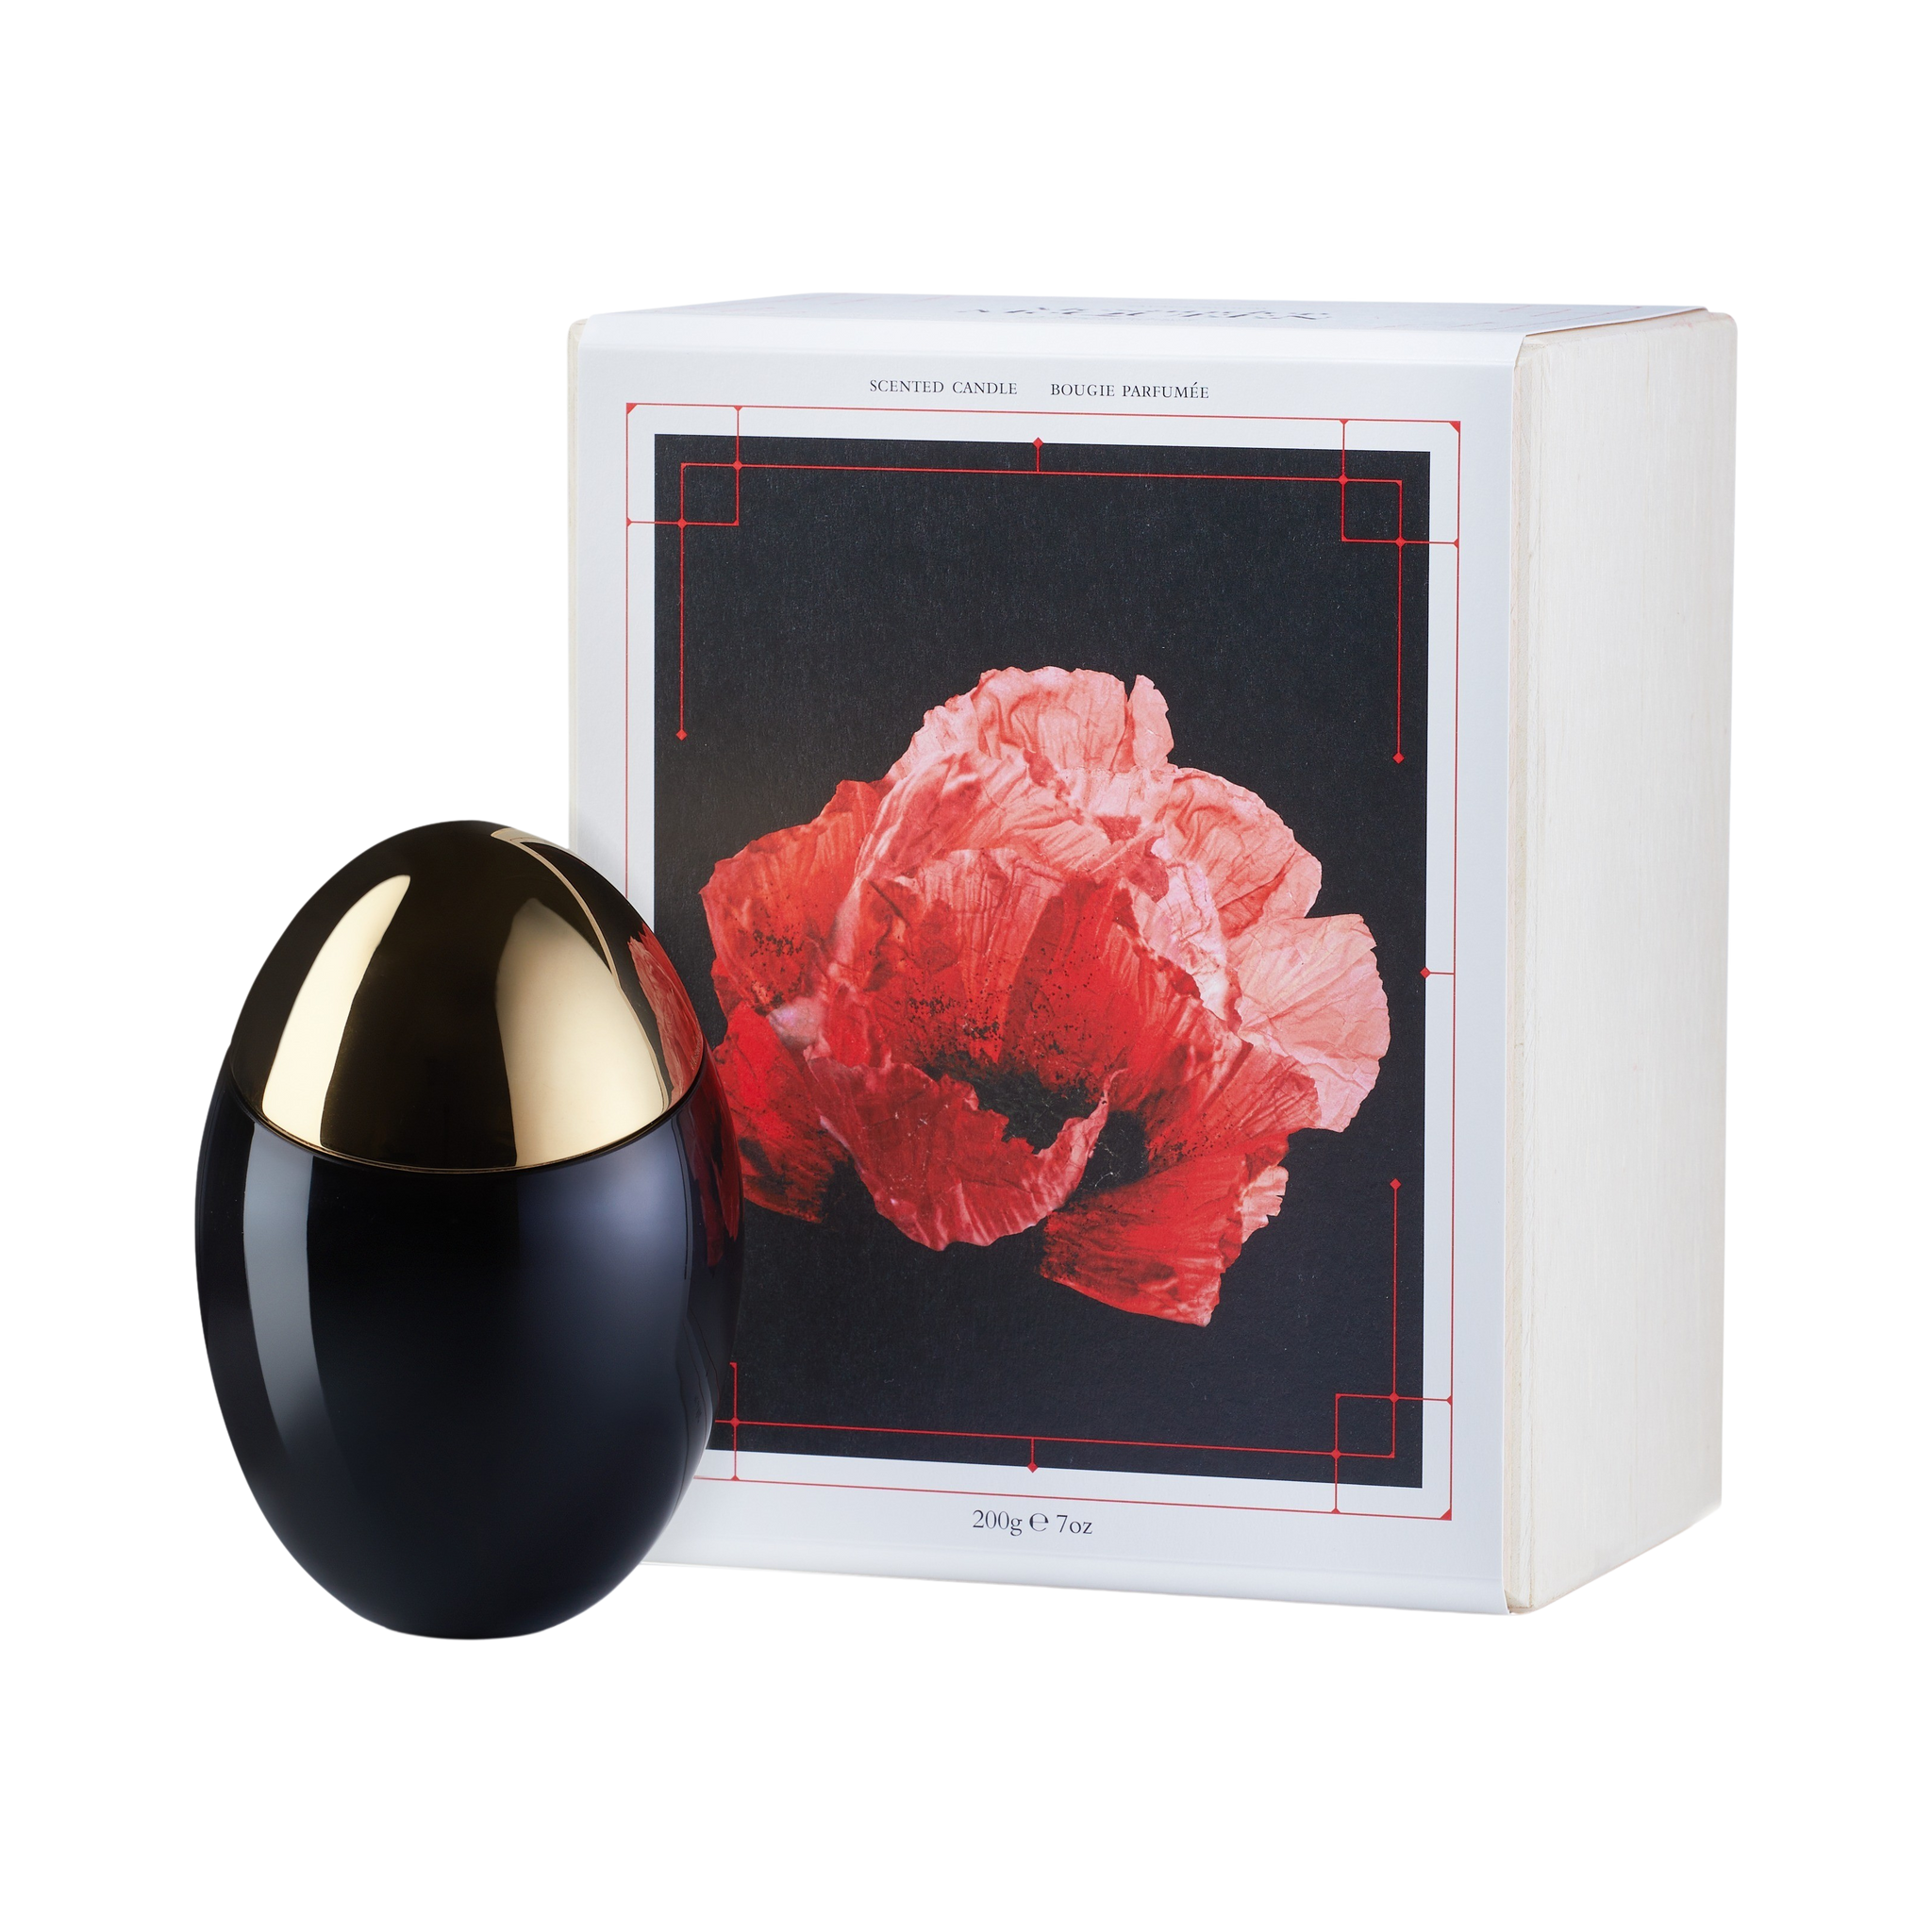 89803 Alexander McQueen Savage Bloom Scented candle